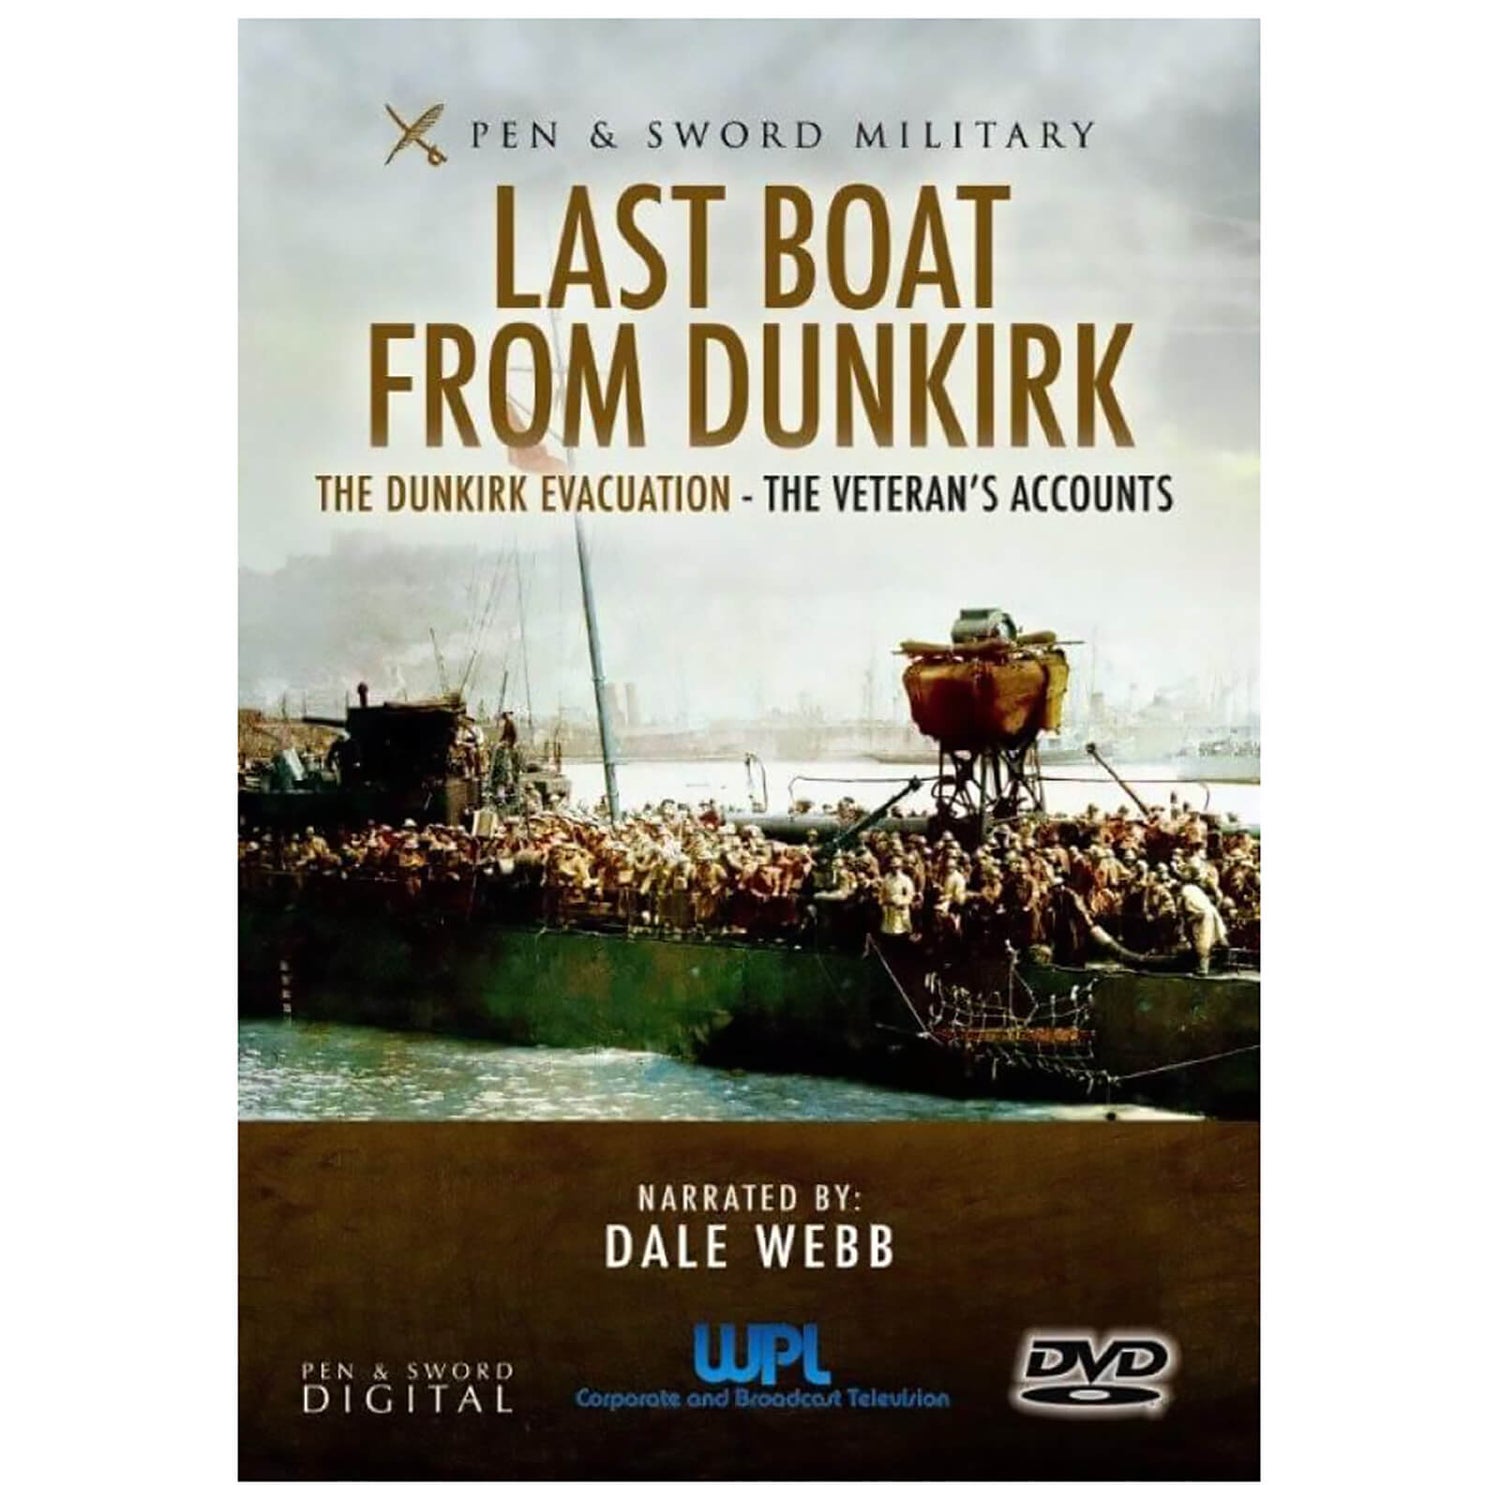 Last Boat from Dunkirk